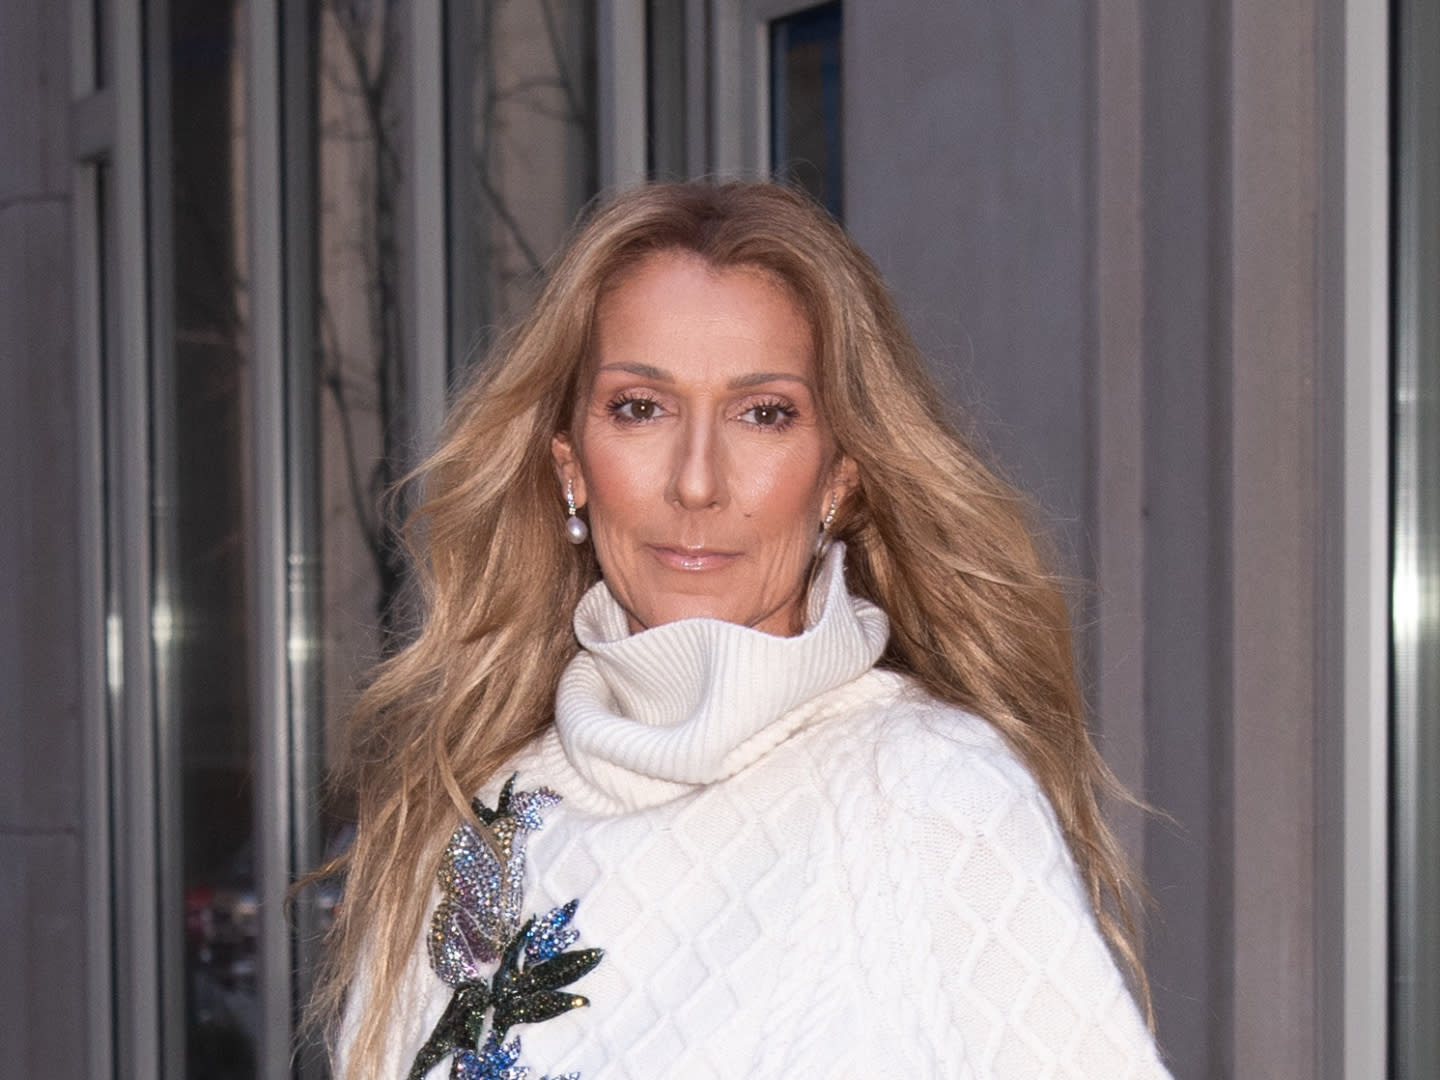 Celine Dion shared a rare photo with her 3 children – in matching PCs!